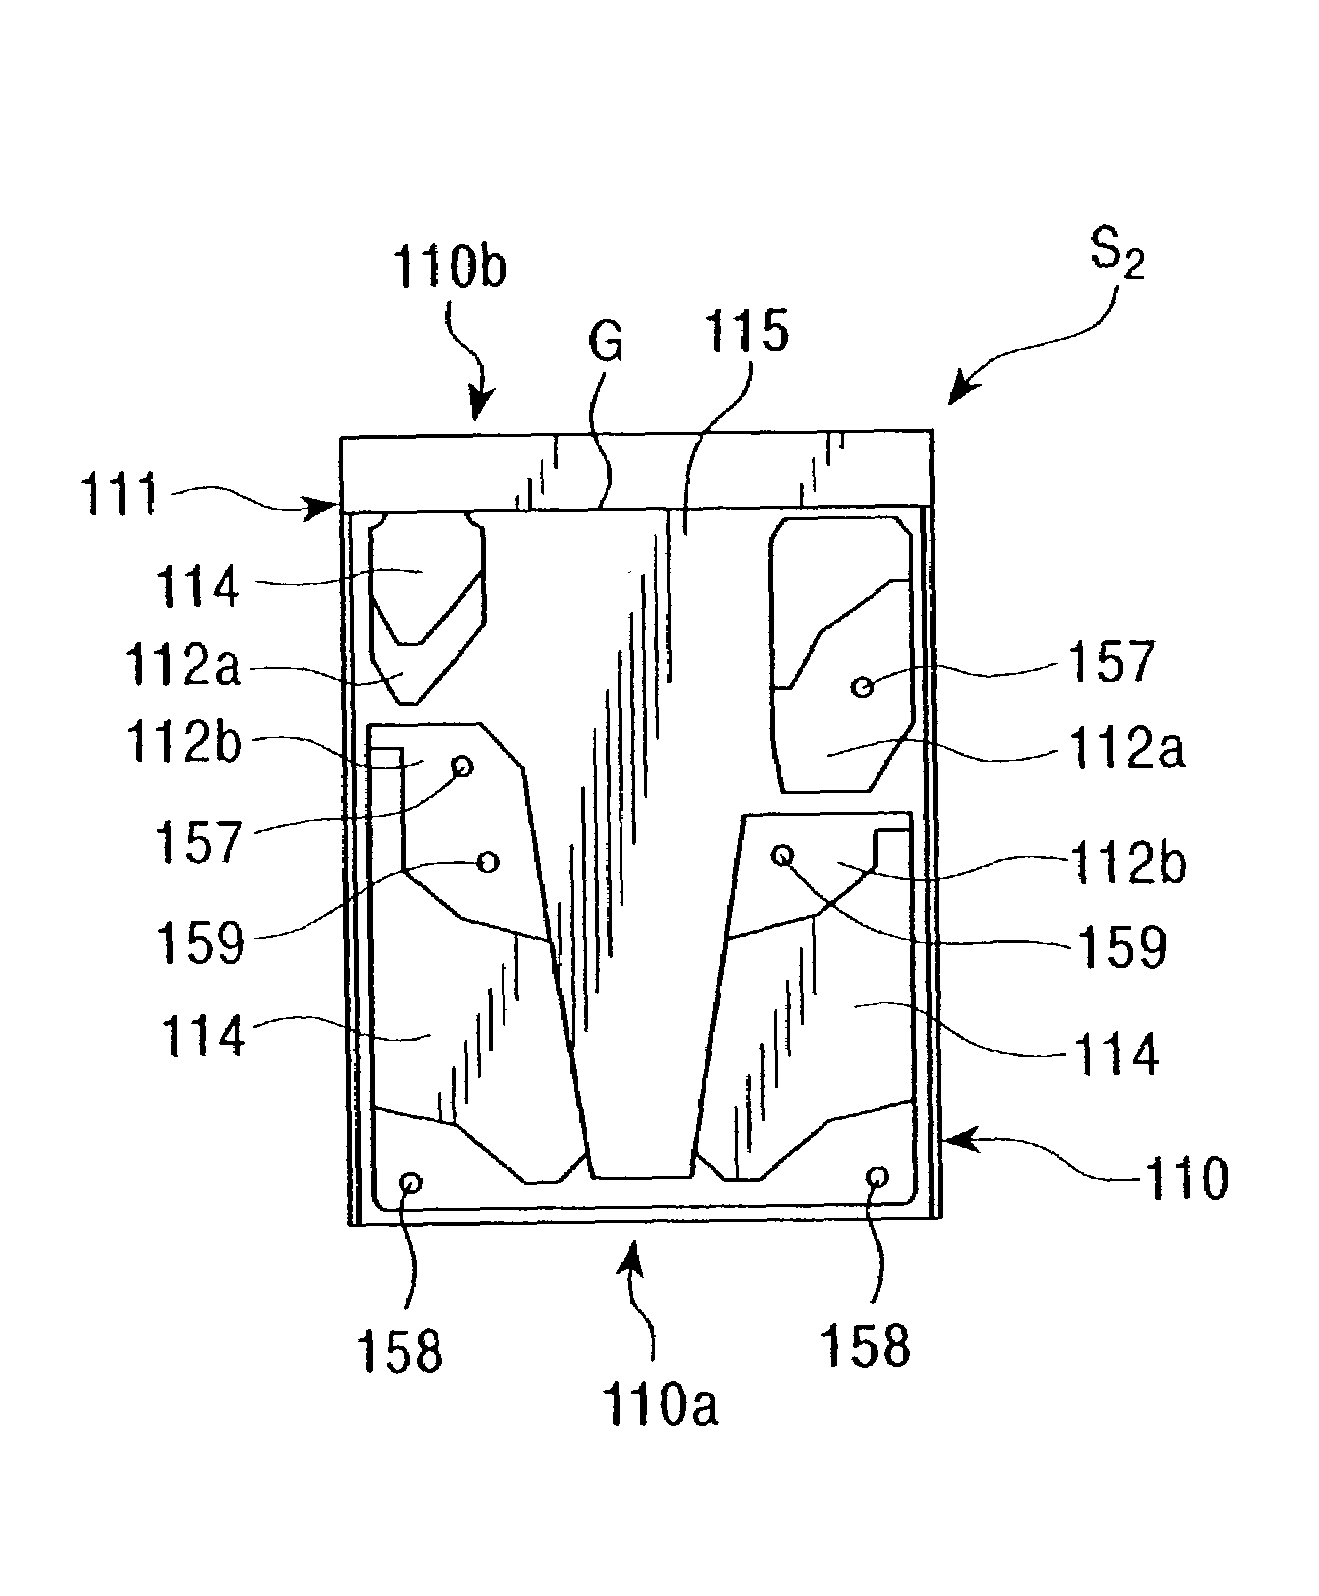 Magnetic head slider having protrusions provided on the medium-facing surface and manufacturing method therefor